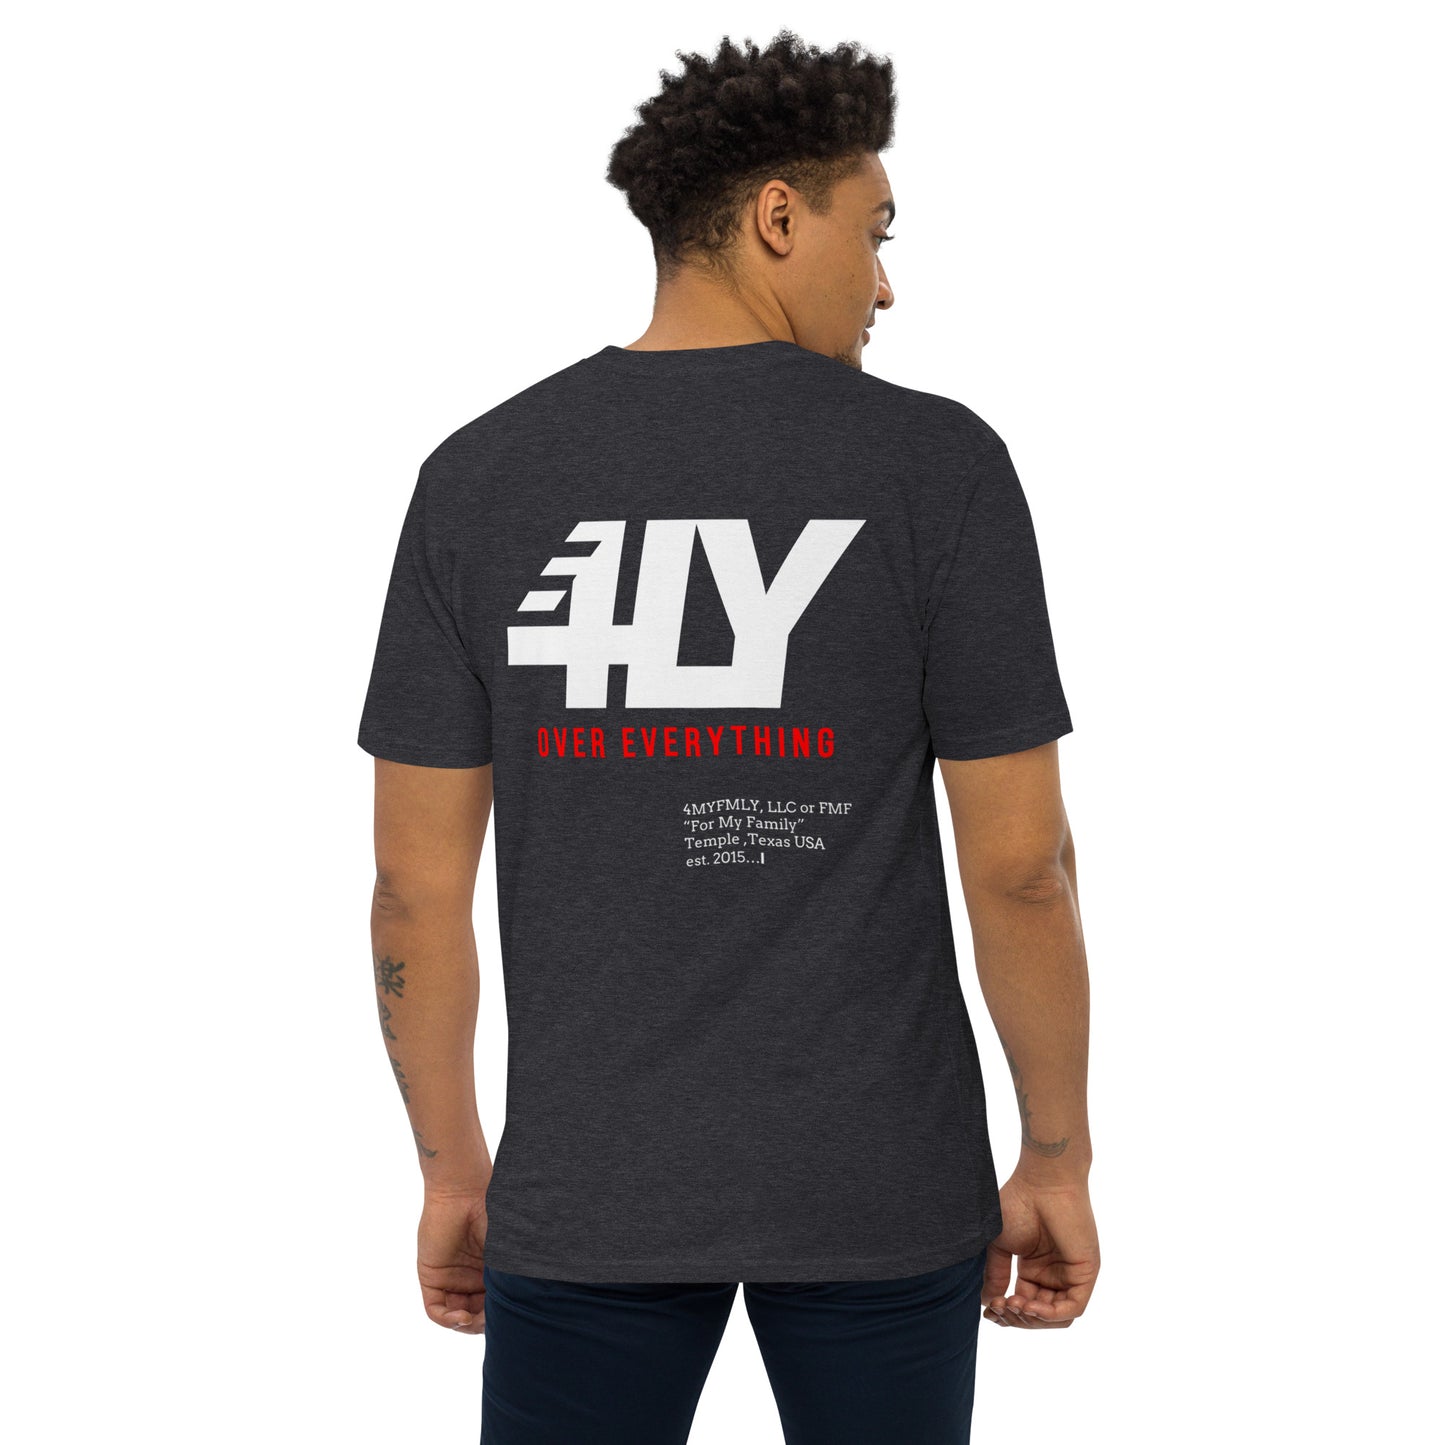 4LY OVER EVERYTHING Tee